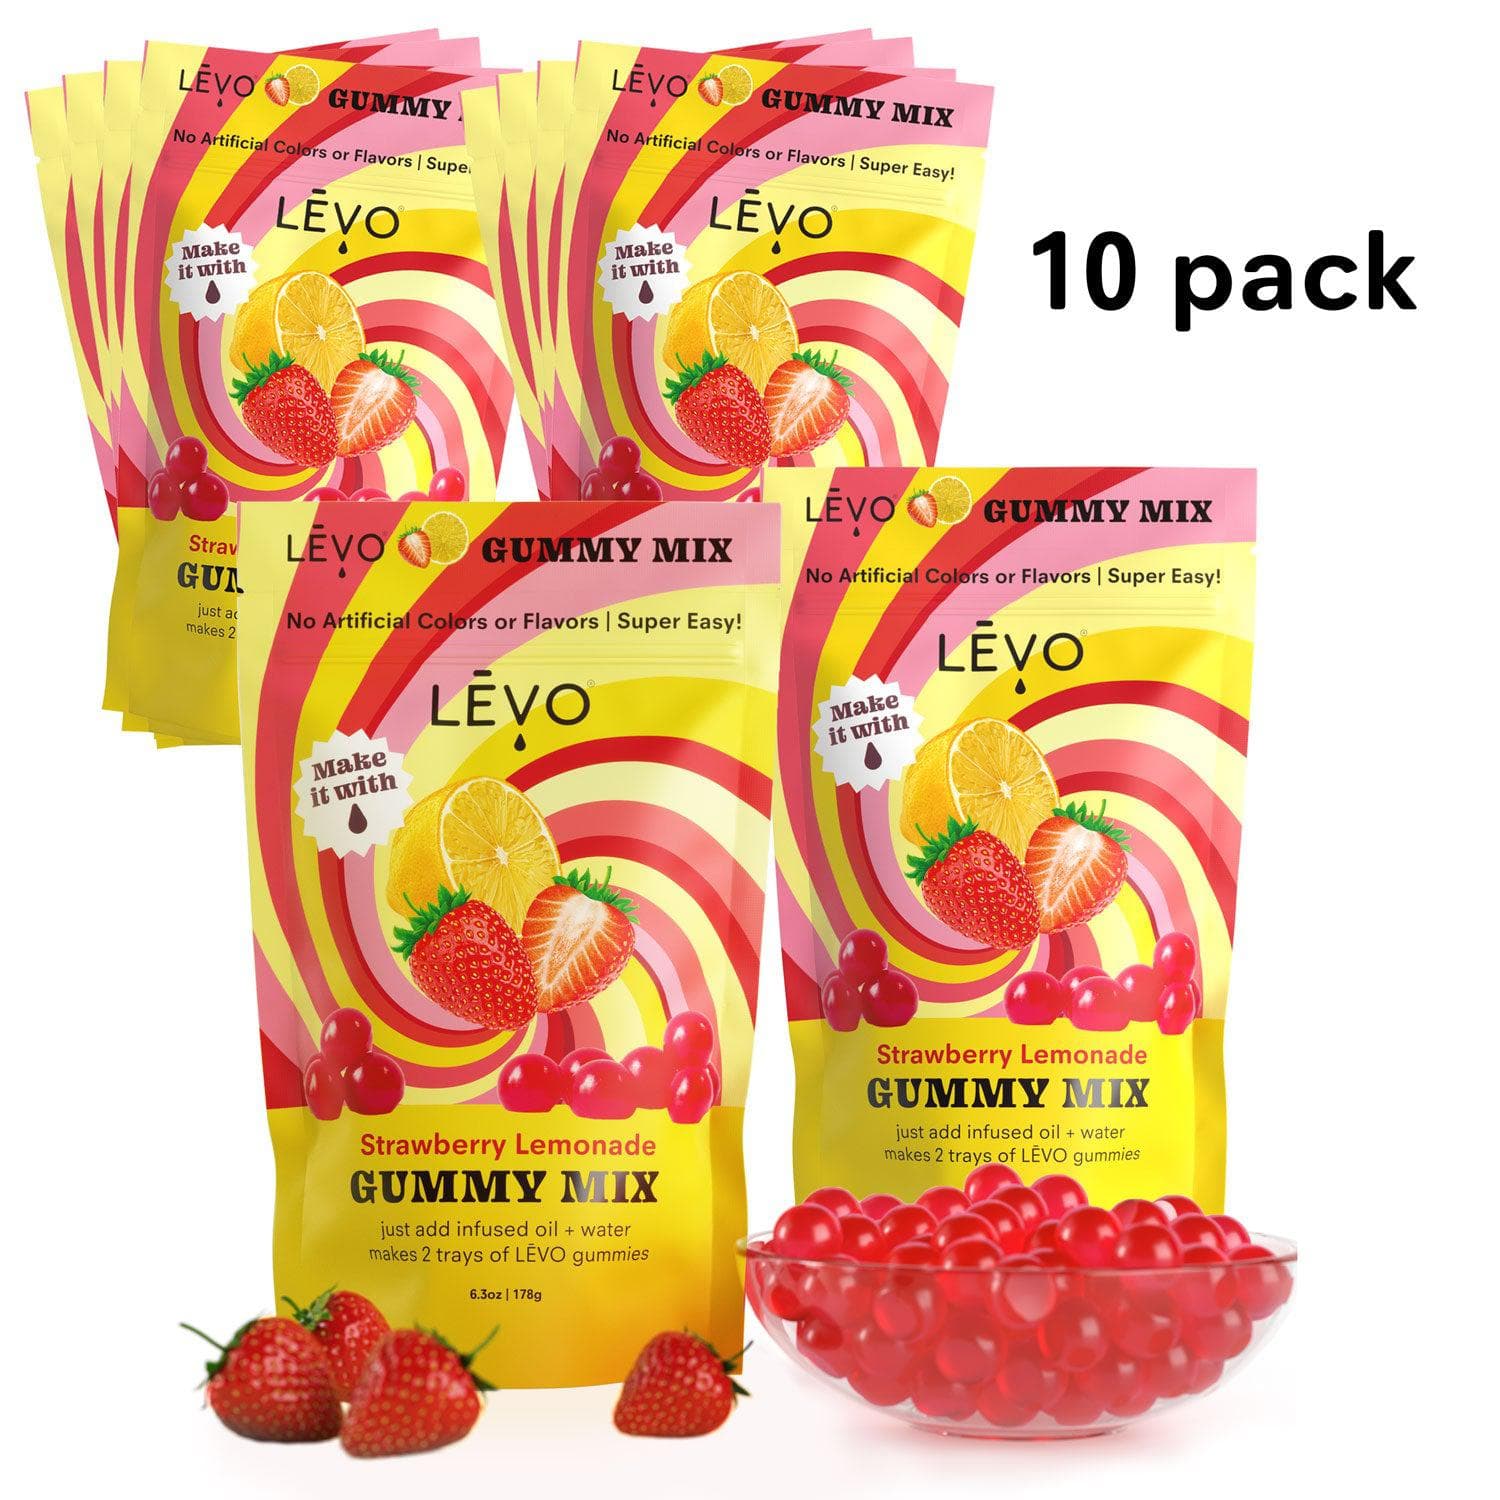 LĒVO Strawberry Lemonade Gummy Mix. Bundle and Save! Make your own edibles with LEVO gummy mix.